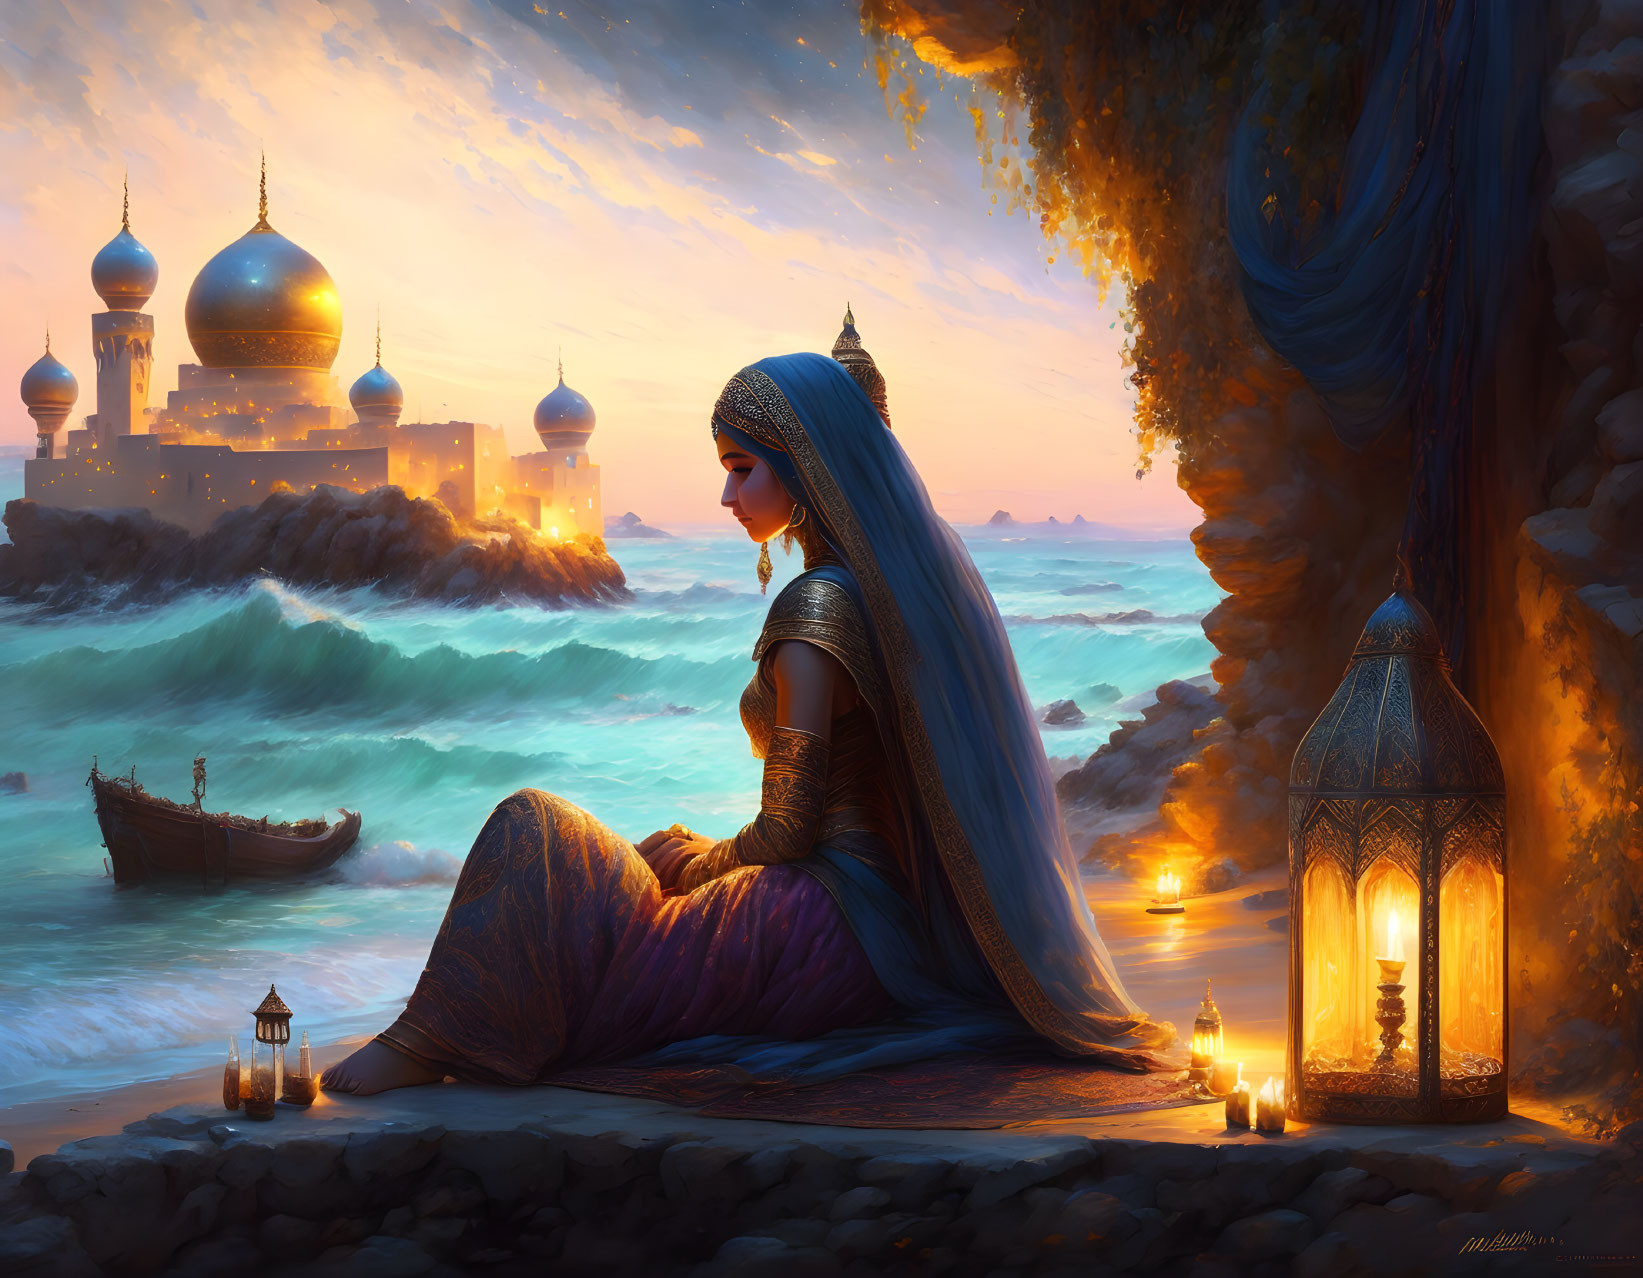 Traditional Attired Woman Gazing at Cityscape by Sea at Sunset